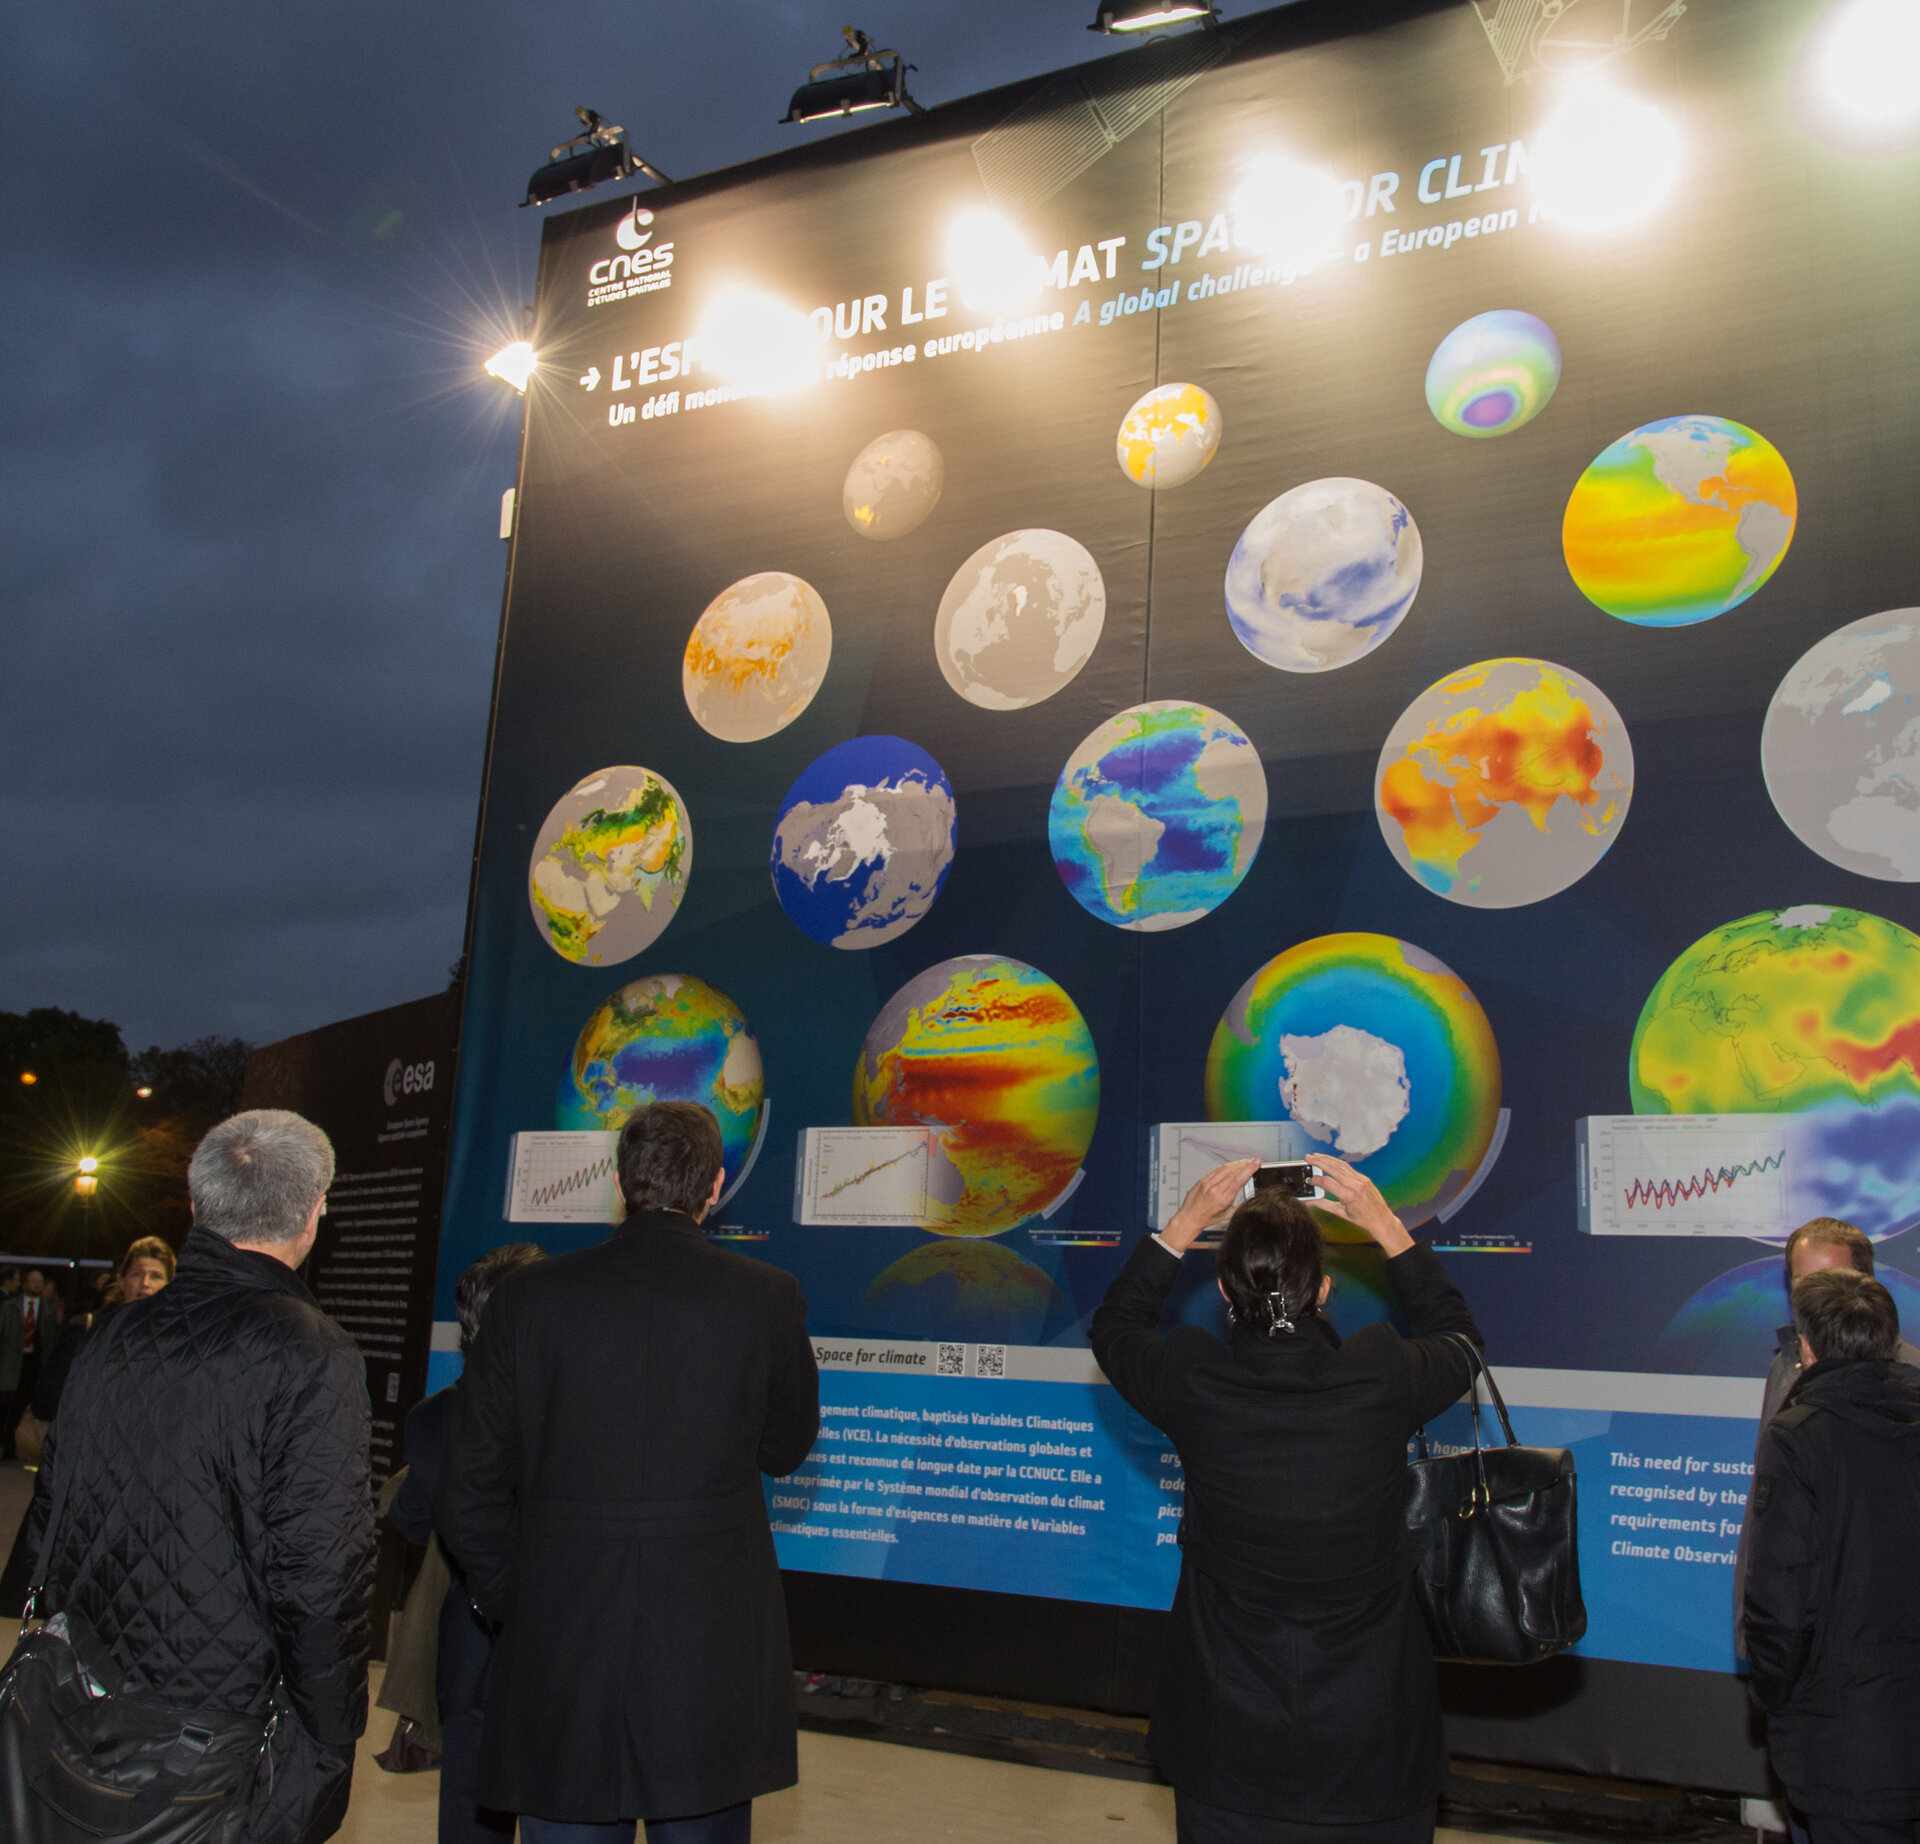 Inauguration of the "Space for Climate" Exhibition